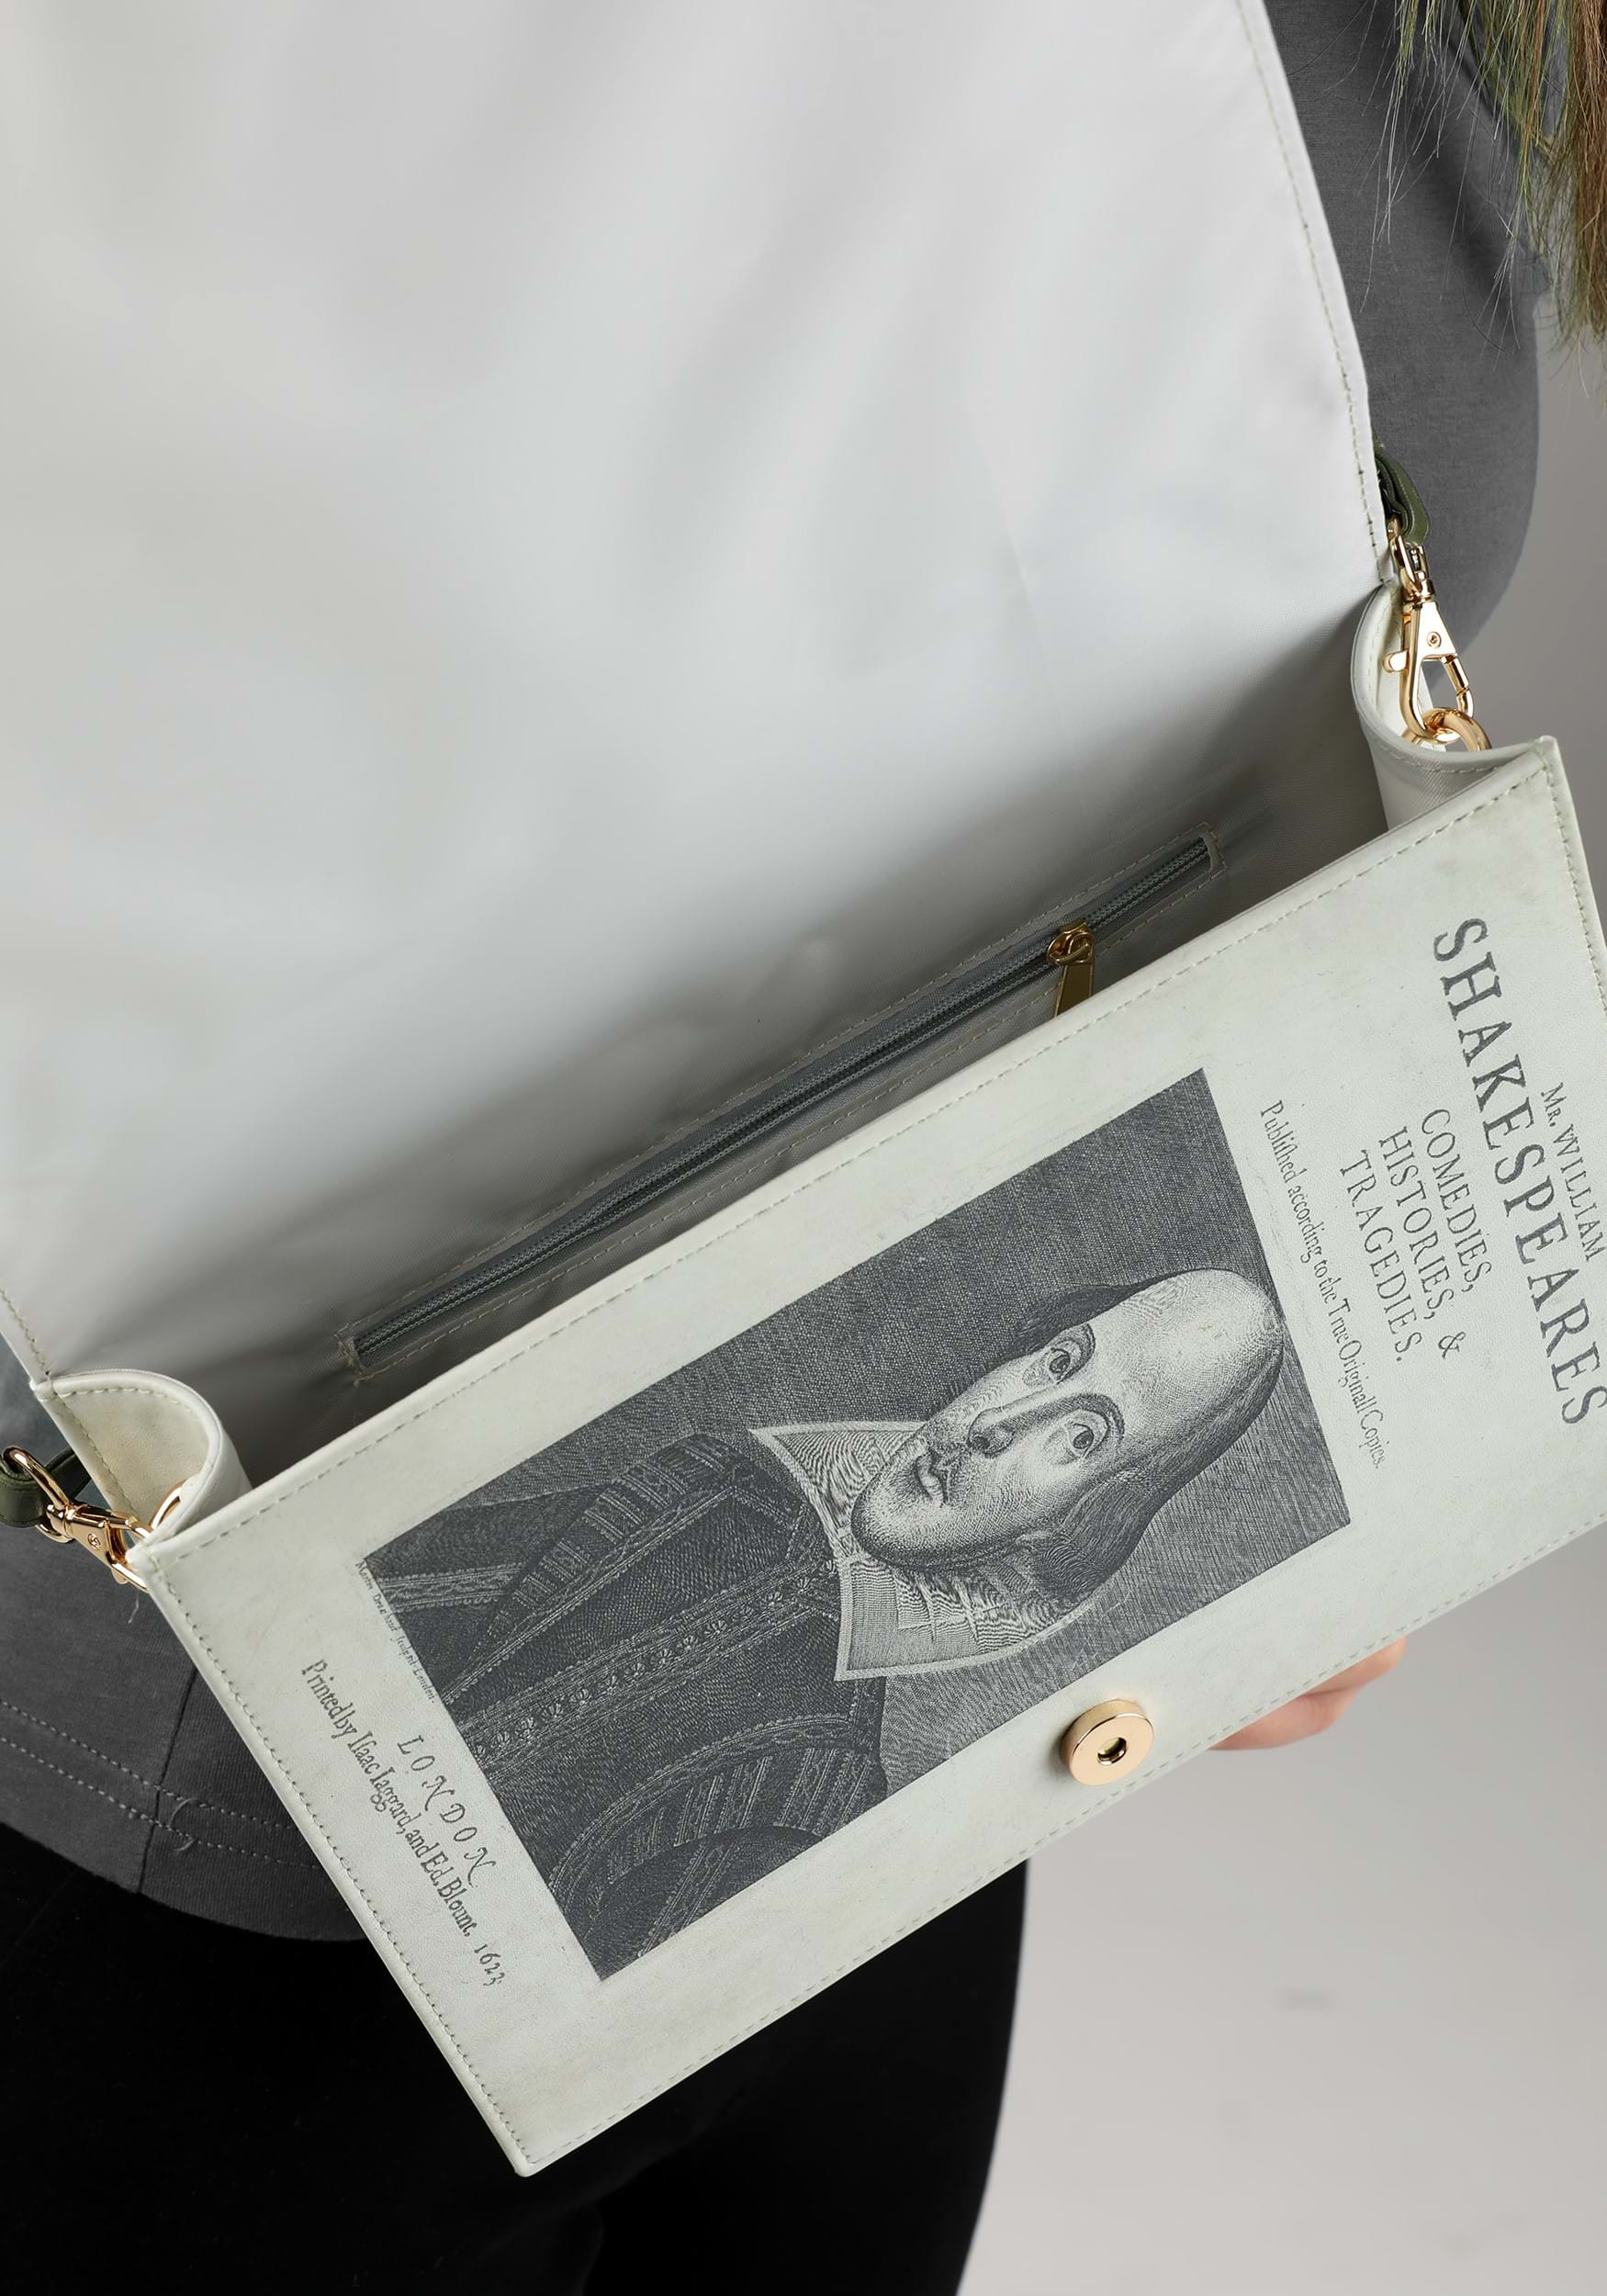 Shakespeare Book Costume Bag , Historical Accessories